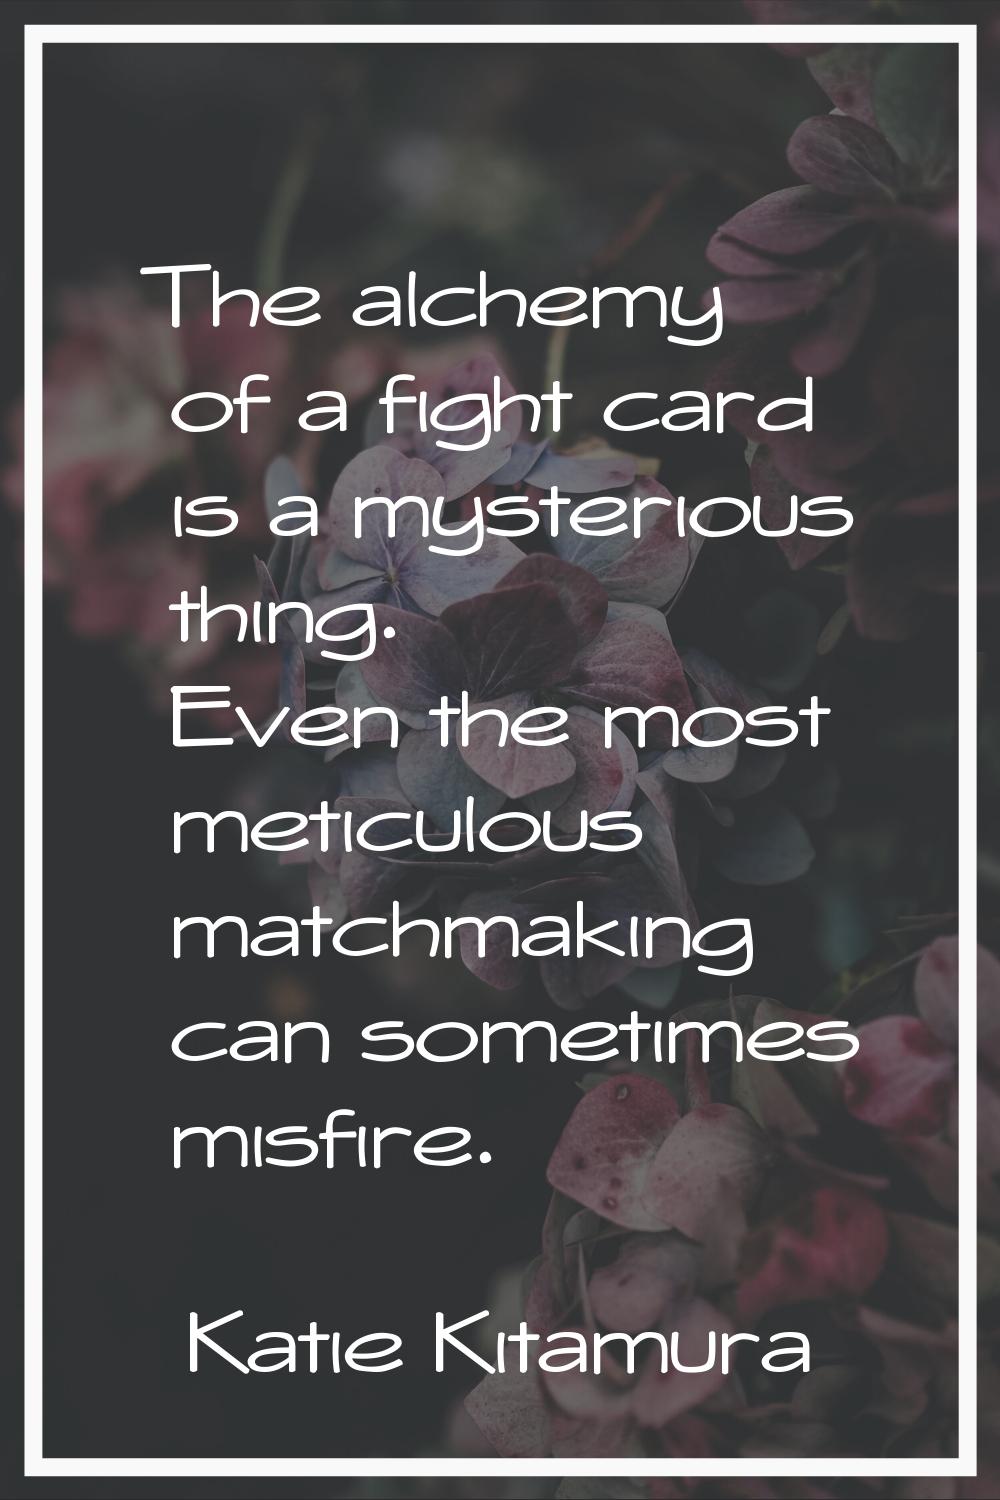 The alchemy of a fight card is a mysterious thing. Even the most meticulous matchmaking can sometim